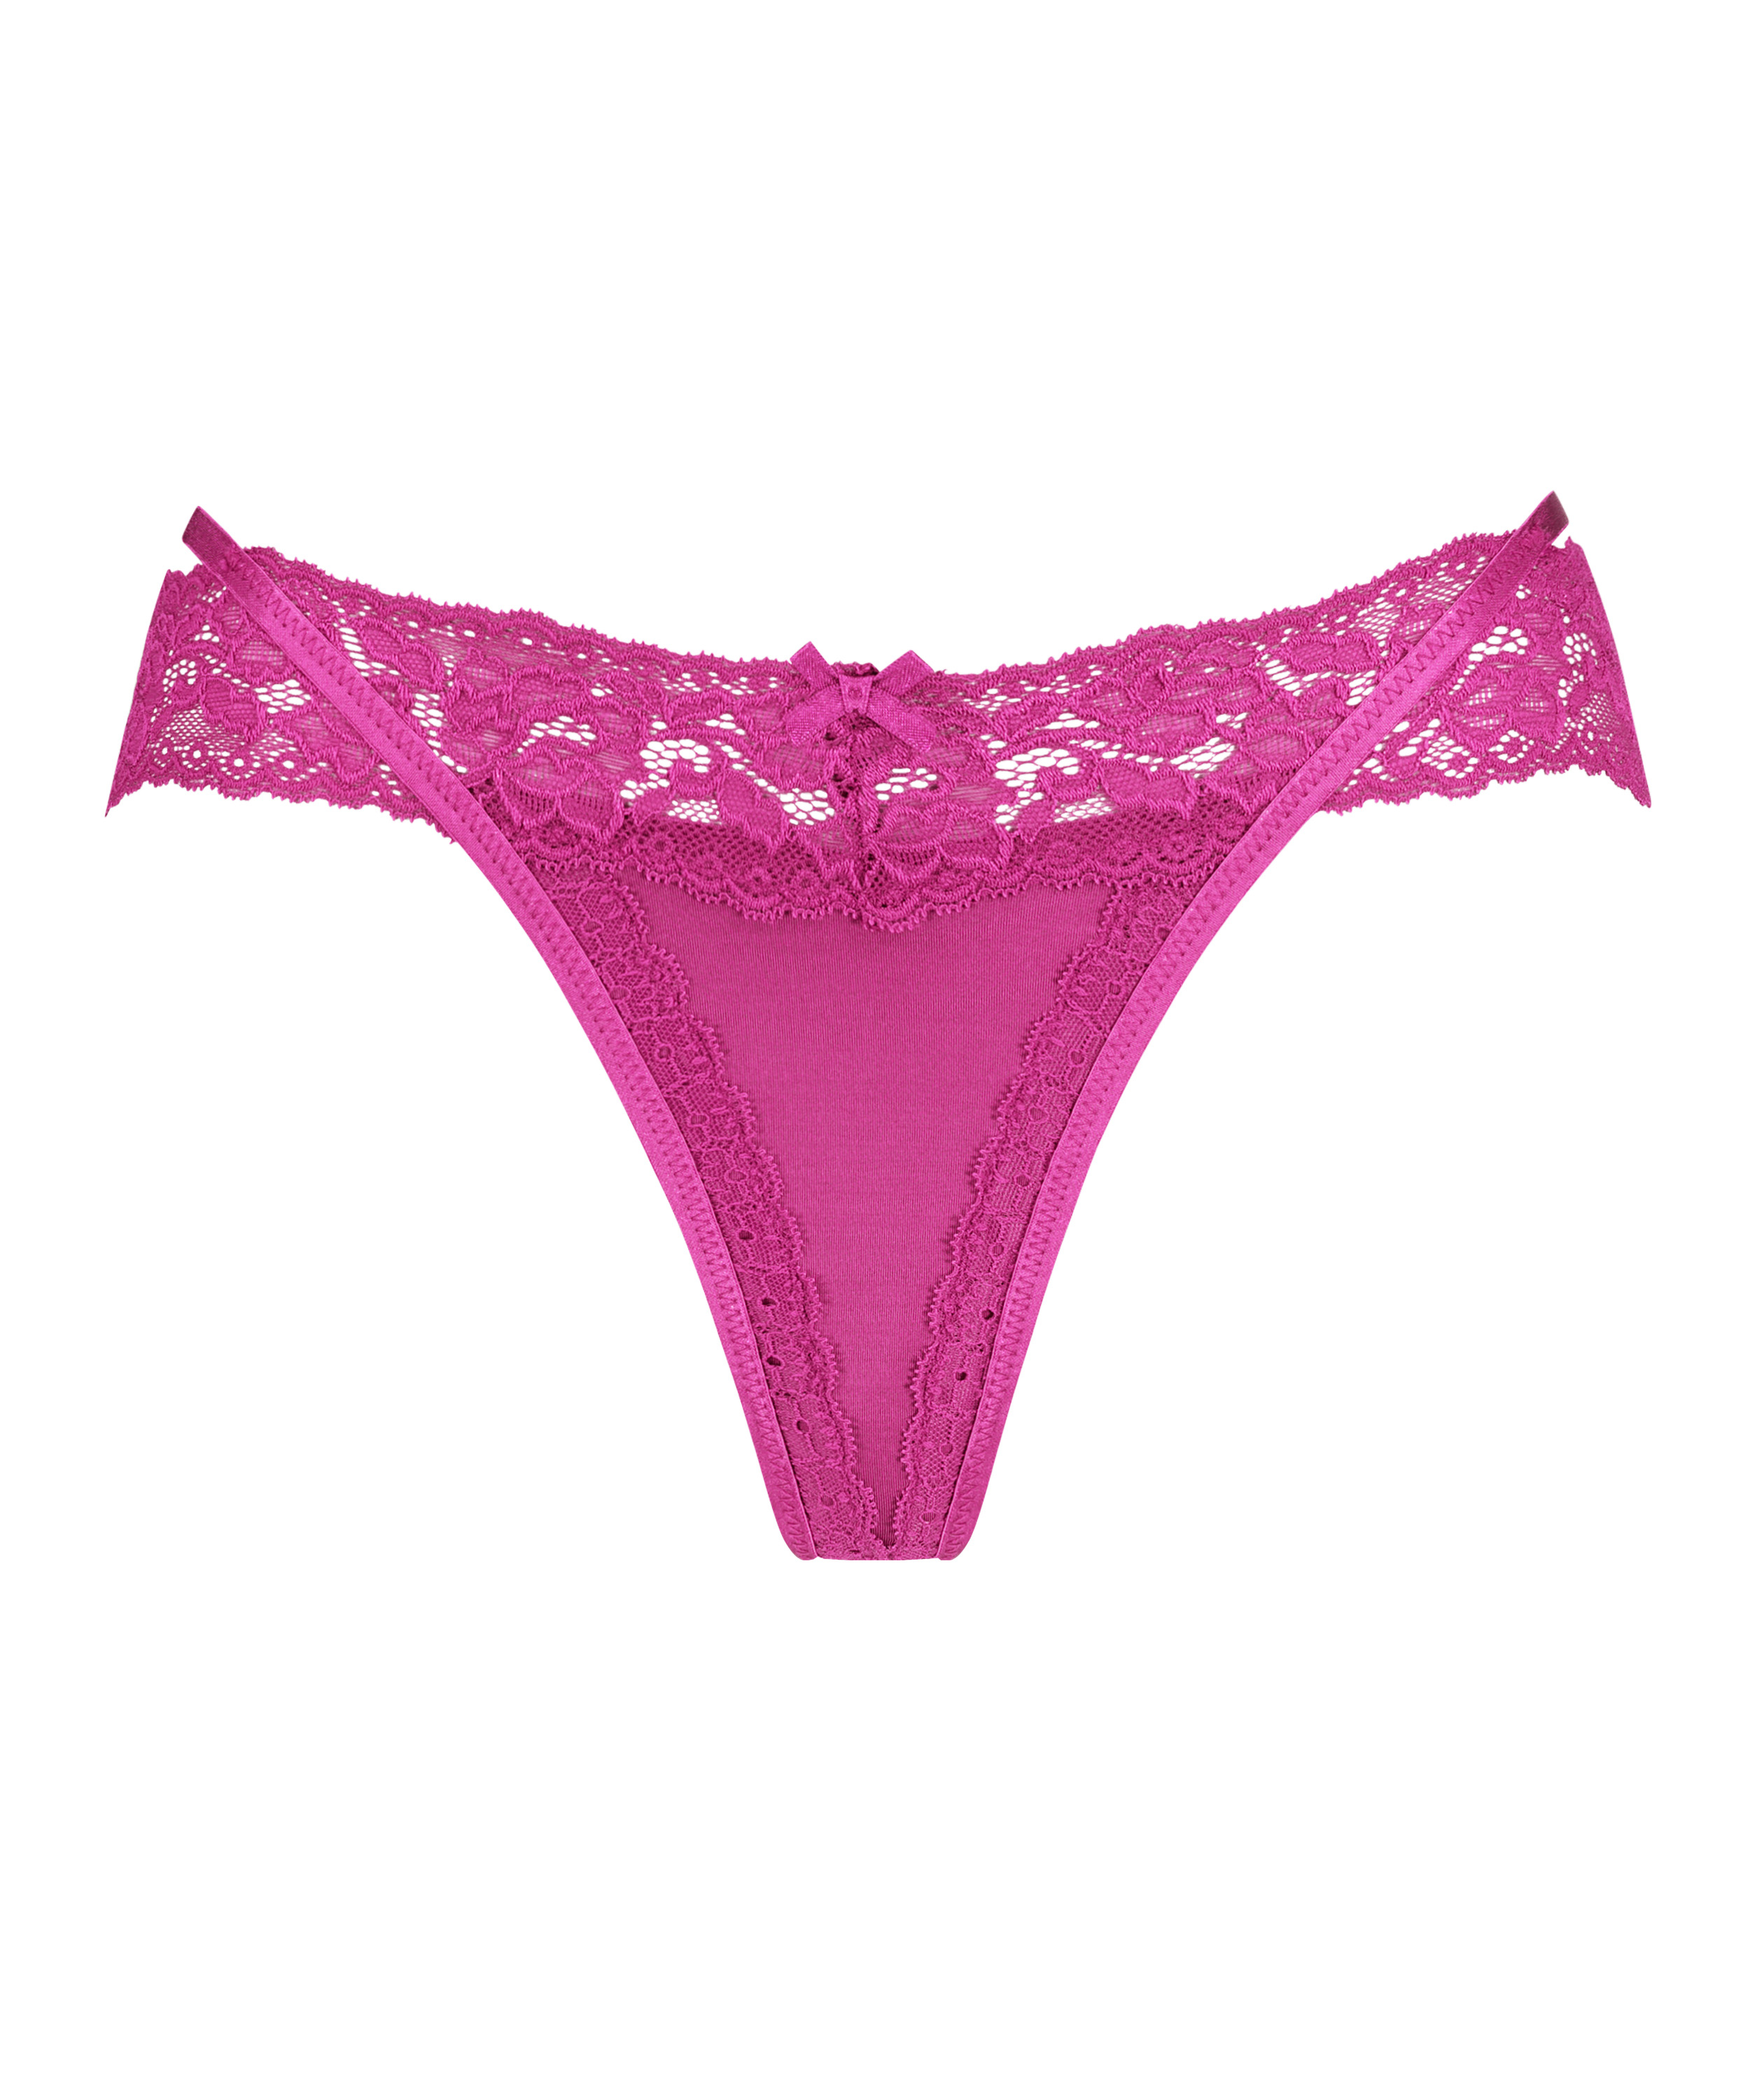 Elliena Extra Low V Thong, Pink, main